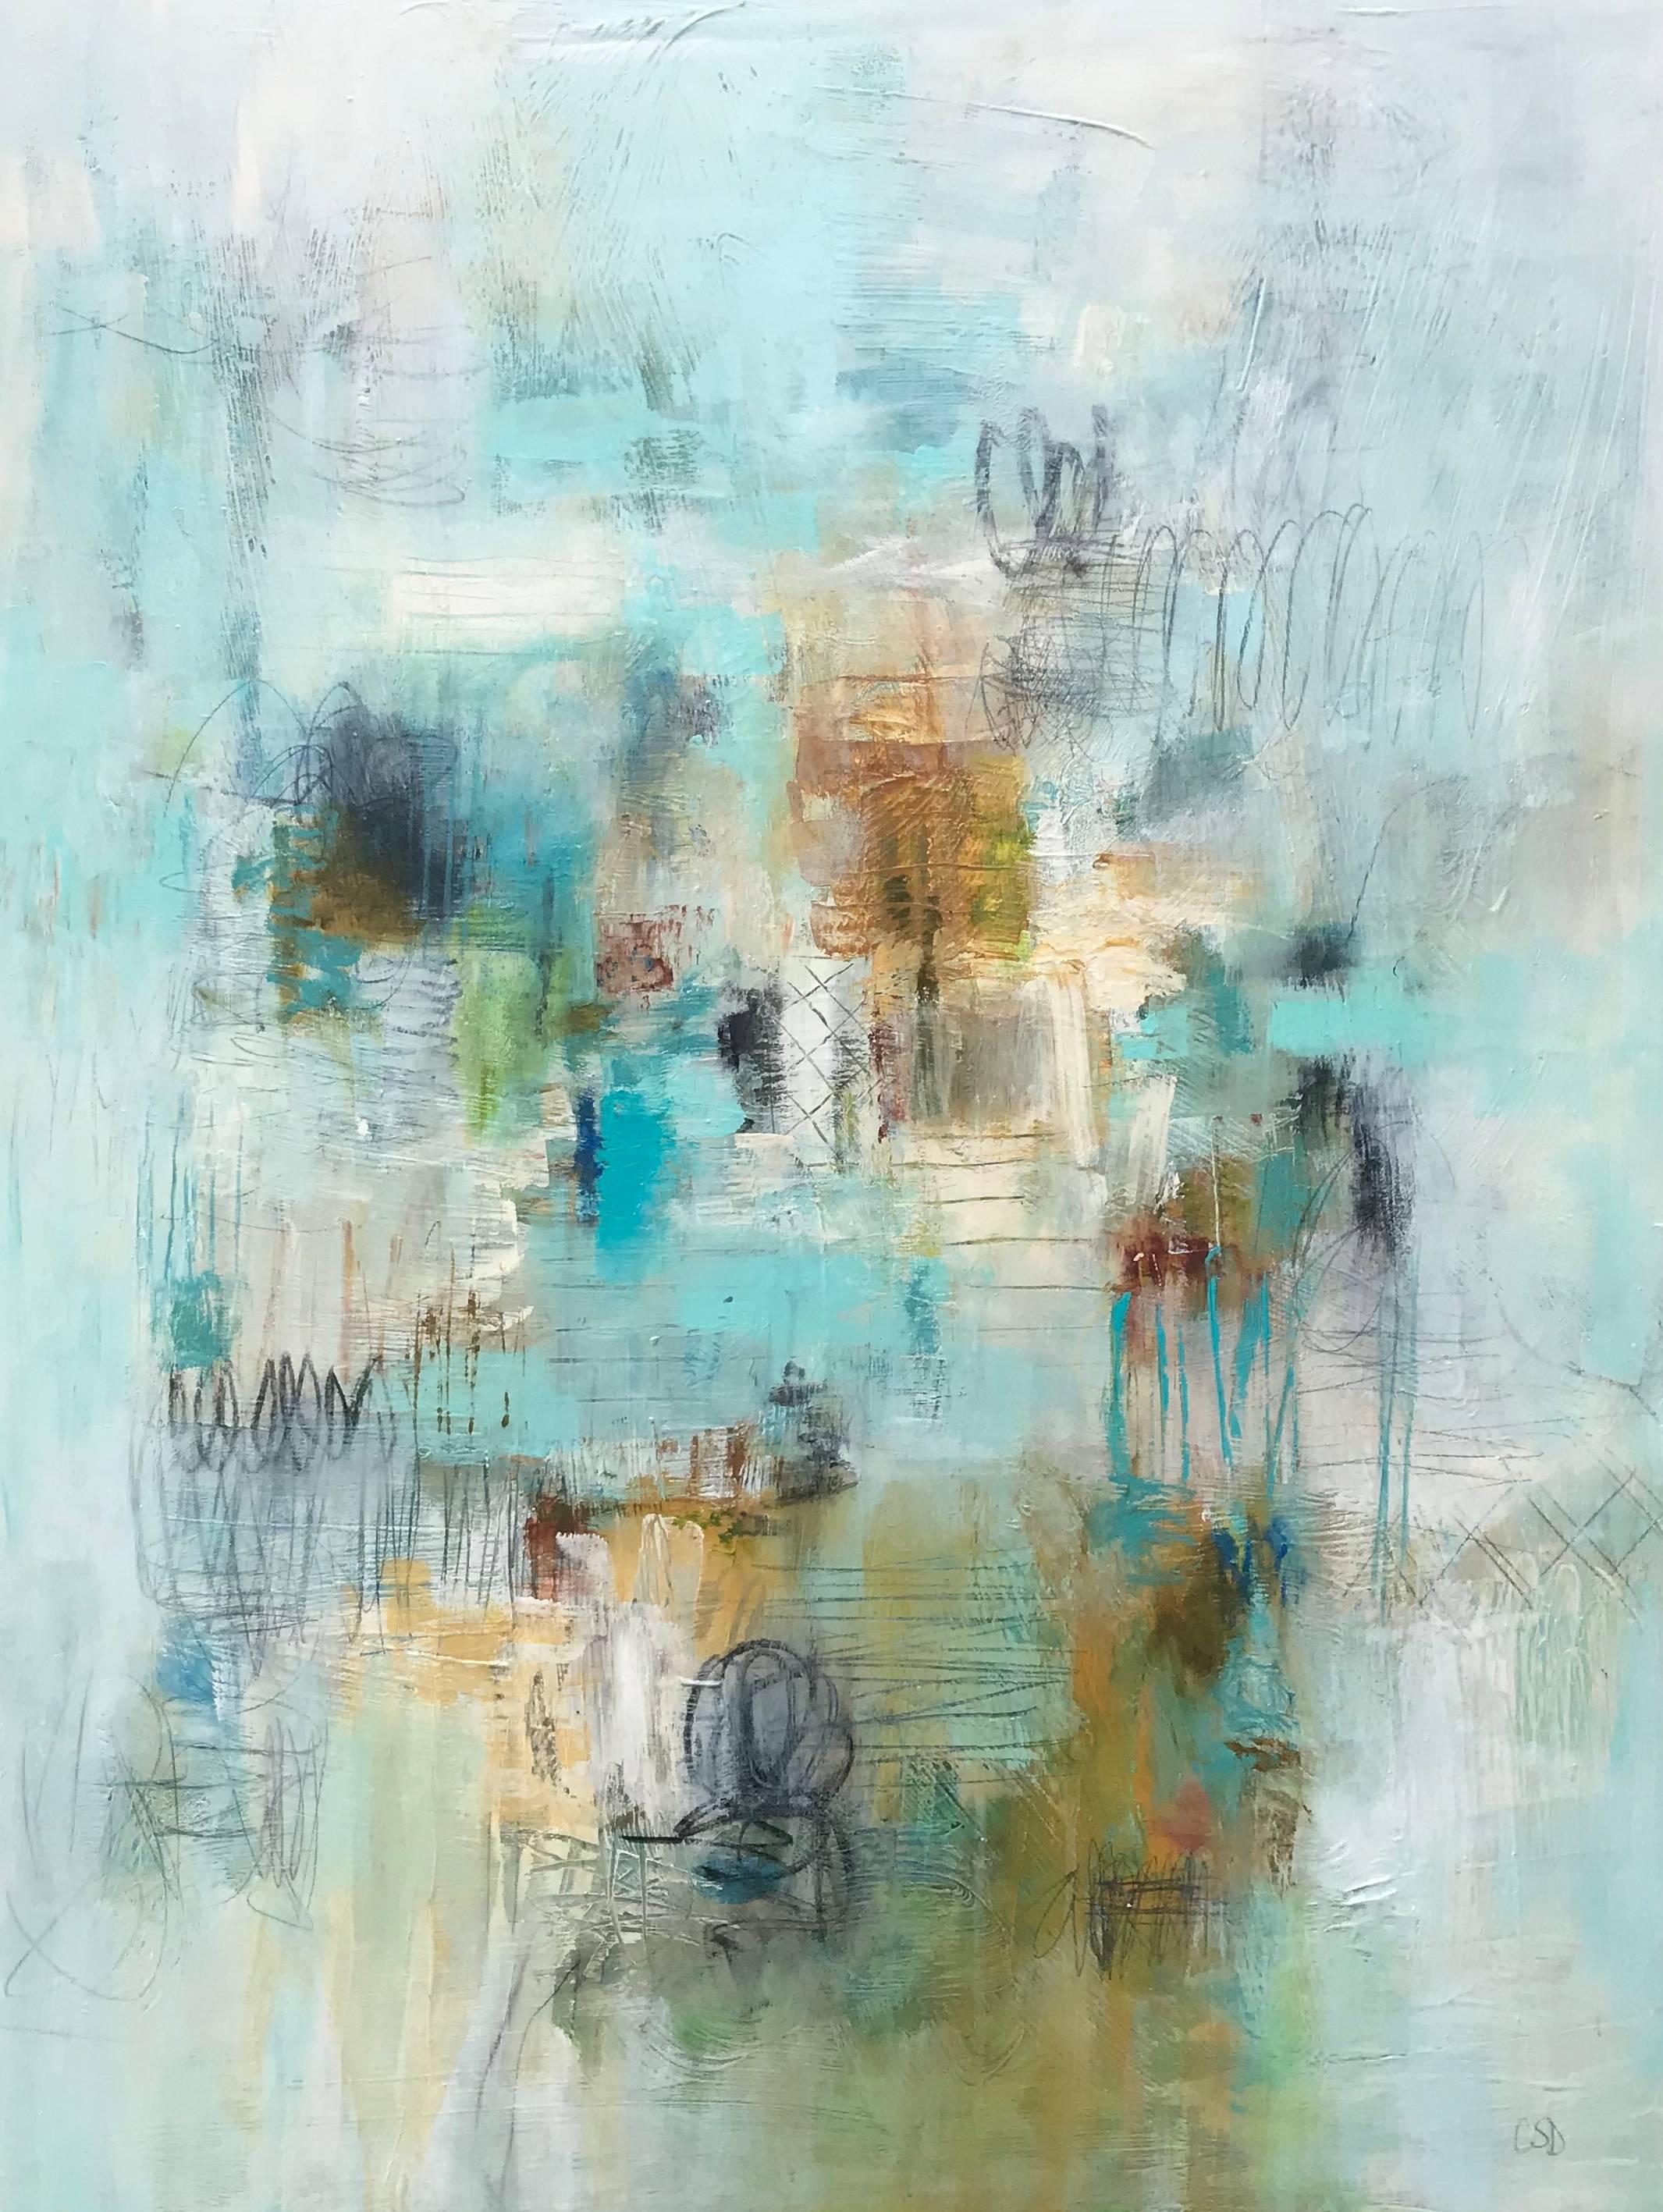 Christina Doelling Abstract Painting - 'Tulum', Vertical Mixed Media on Canvas Abstract Expressionist Painting